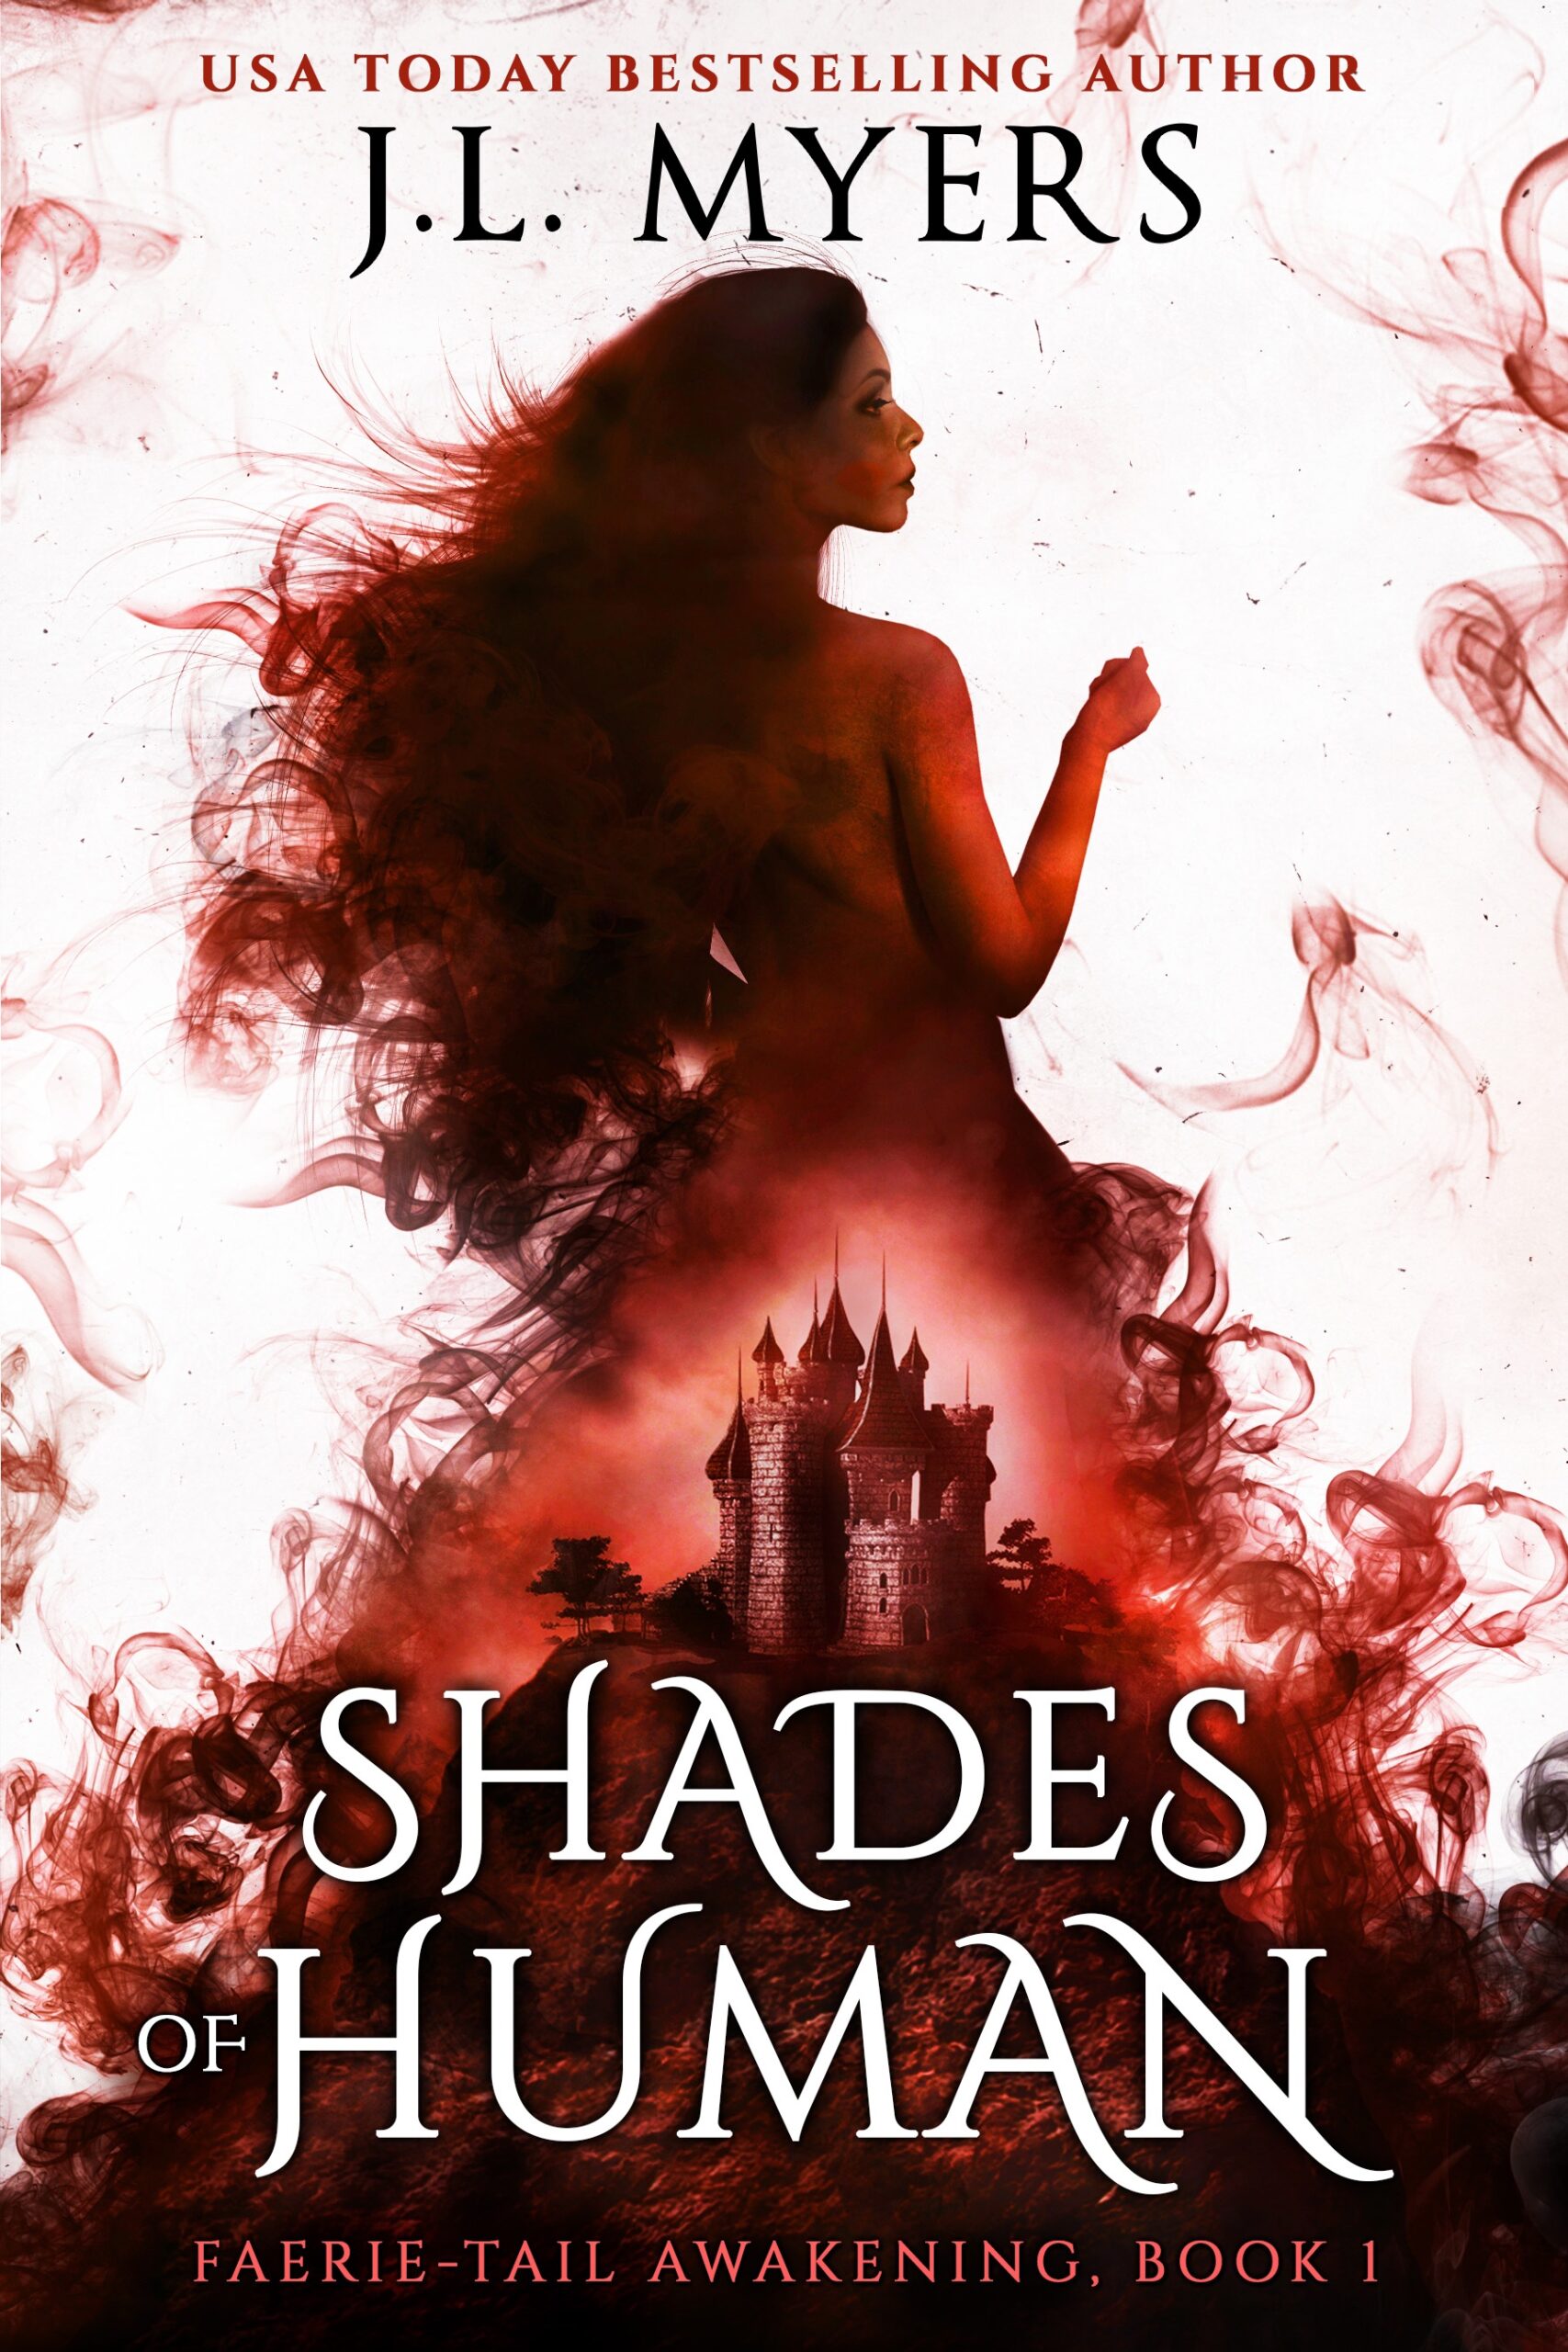 FREE: Shades of Human (Faerie-Tail Awakening #1) by J.L. Myers